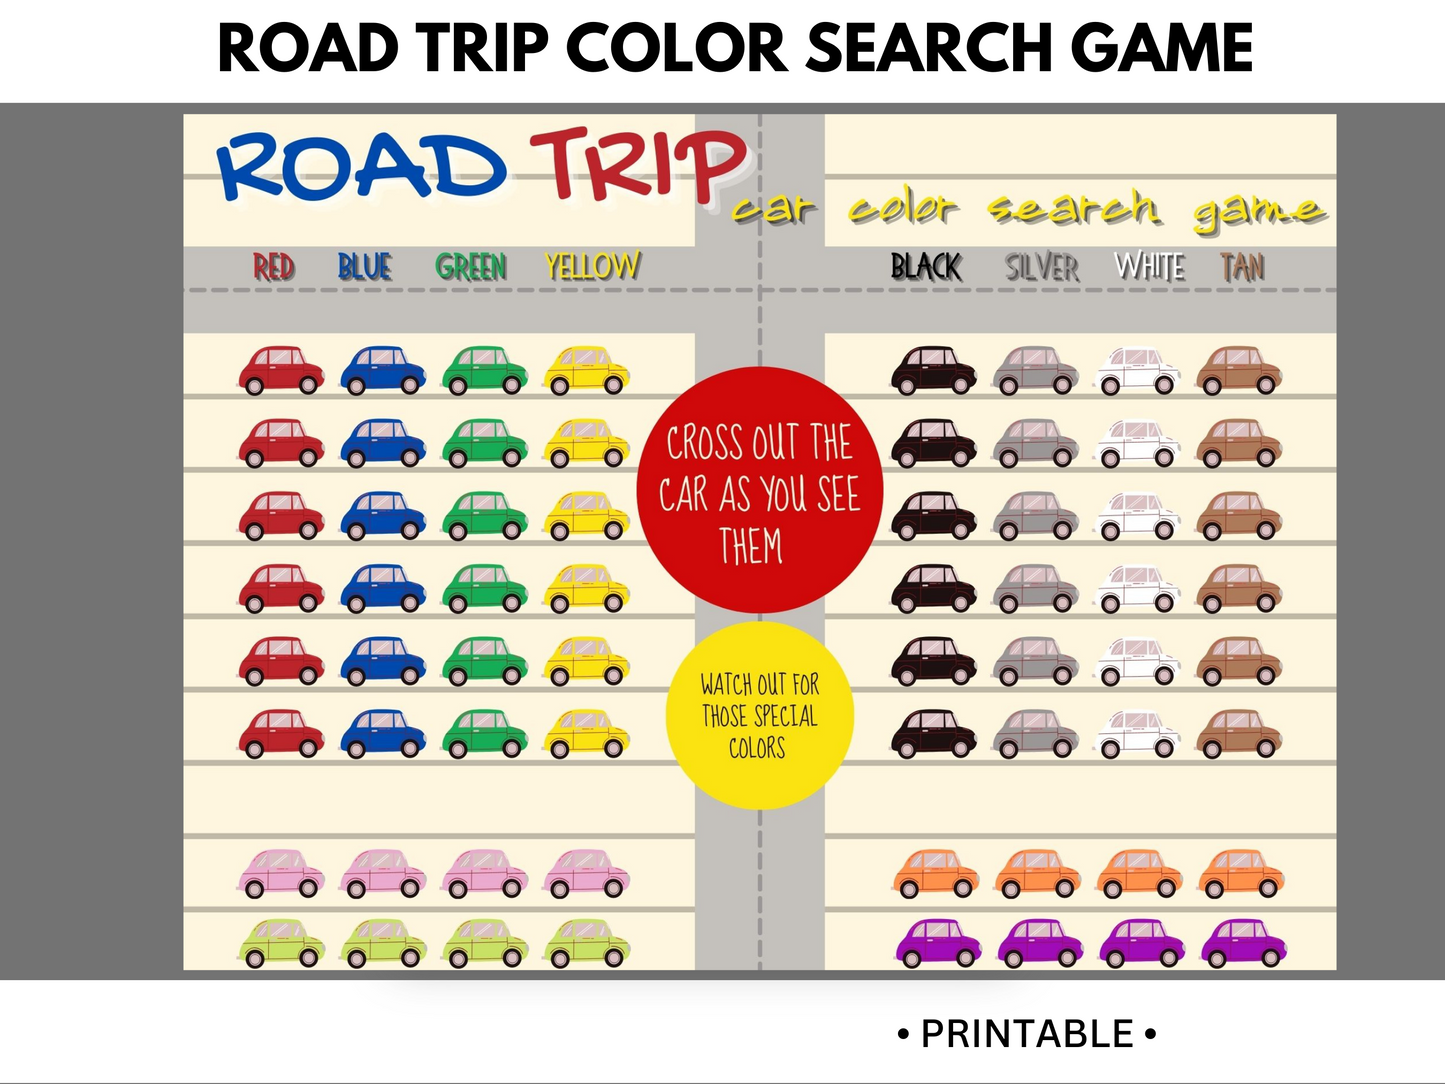 Printable road trip car color search game.  Red, blue, green, yellow, black, grey, white and pink cars shown.